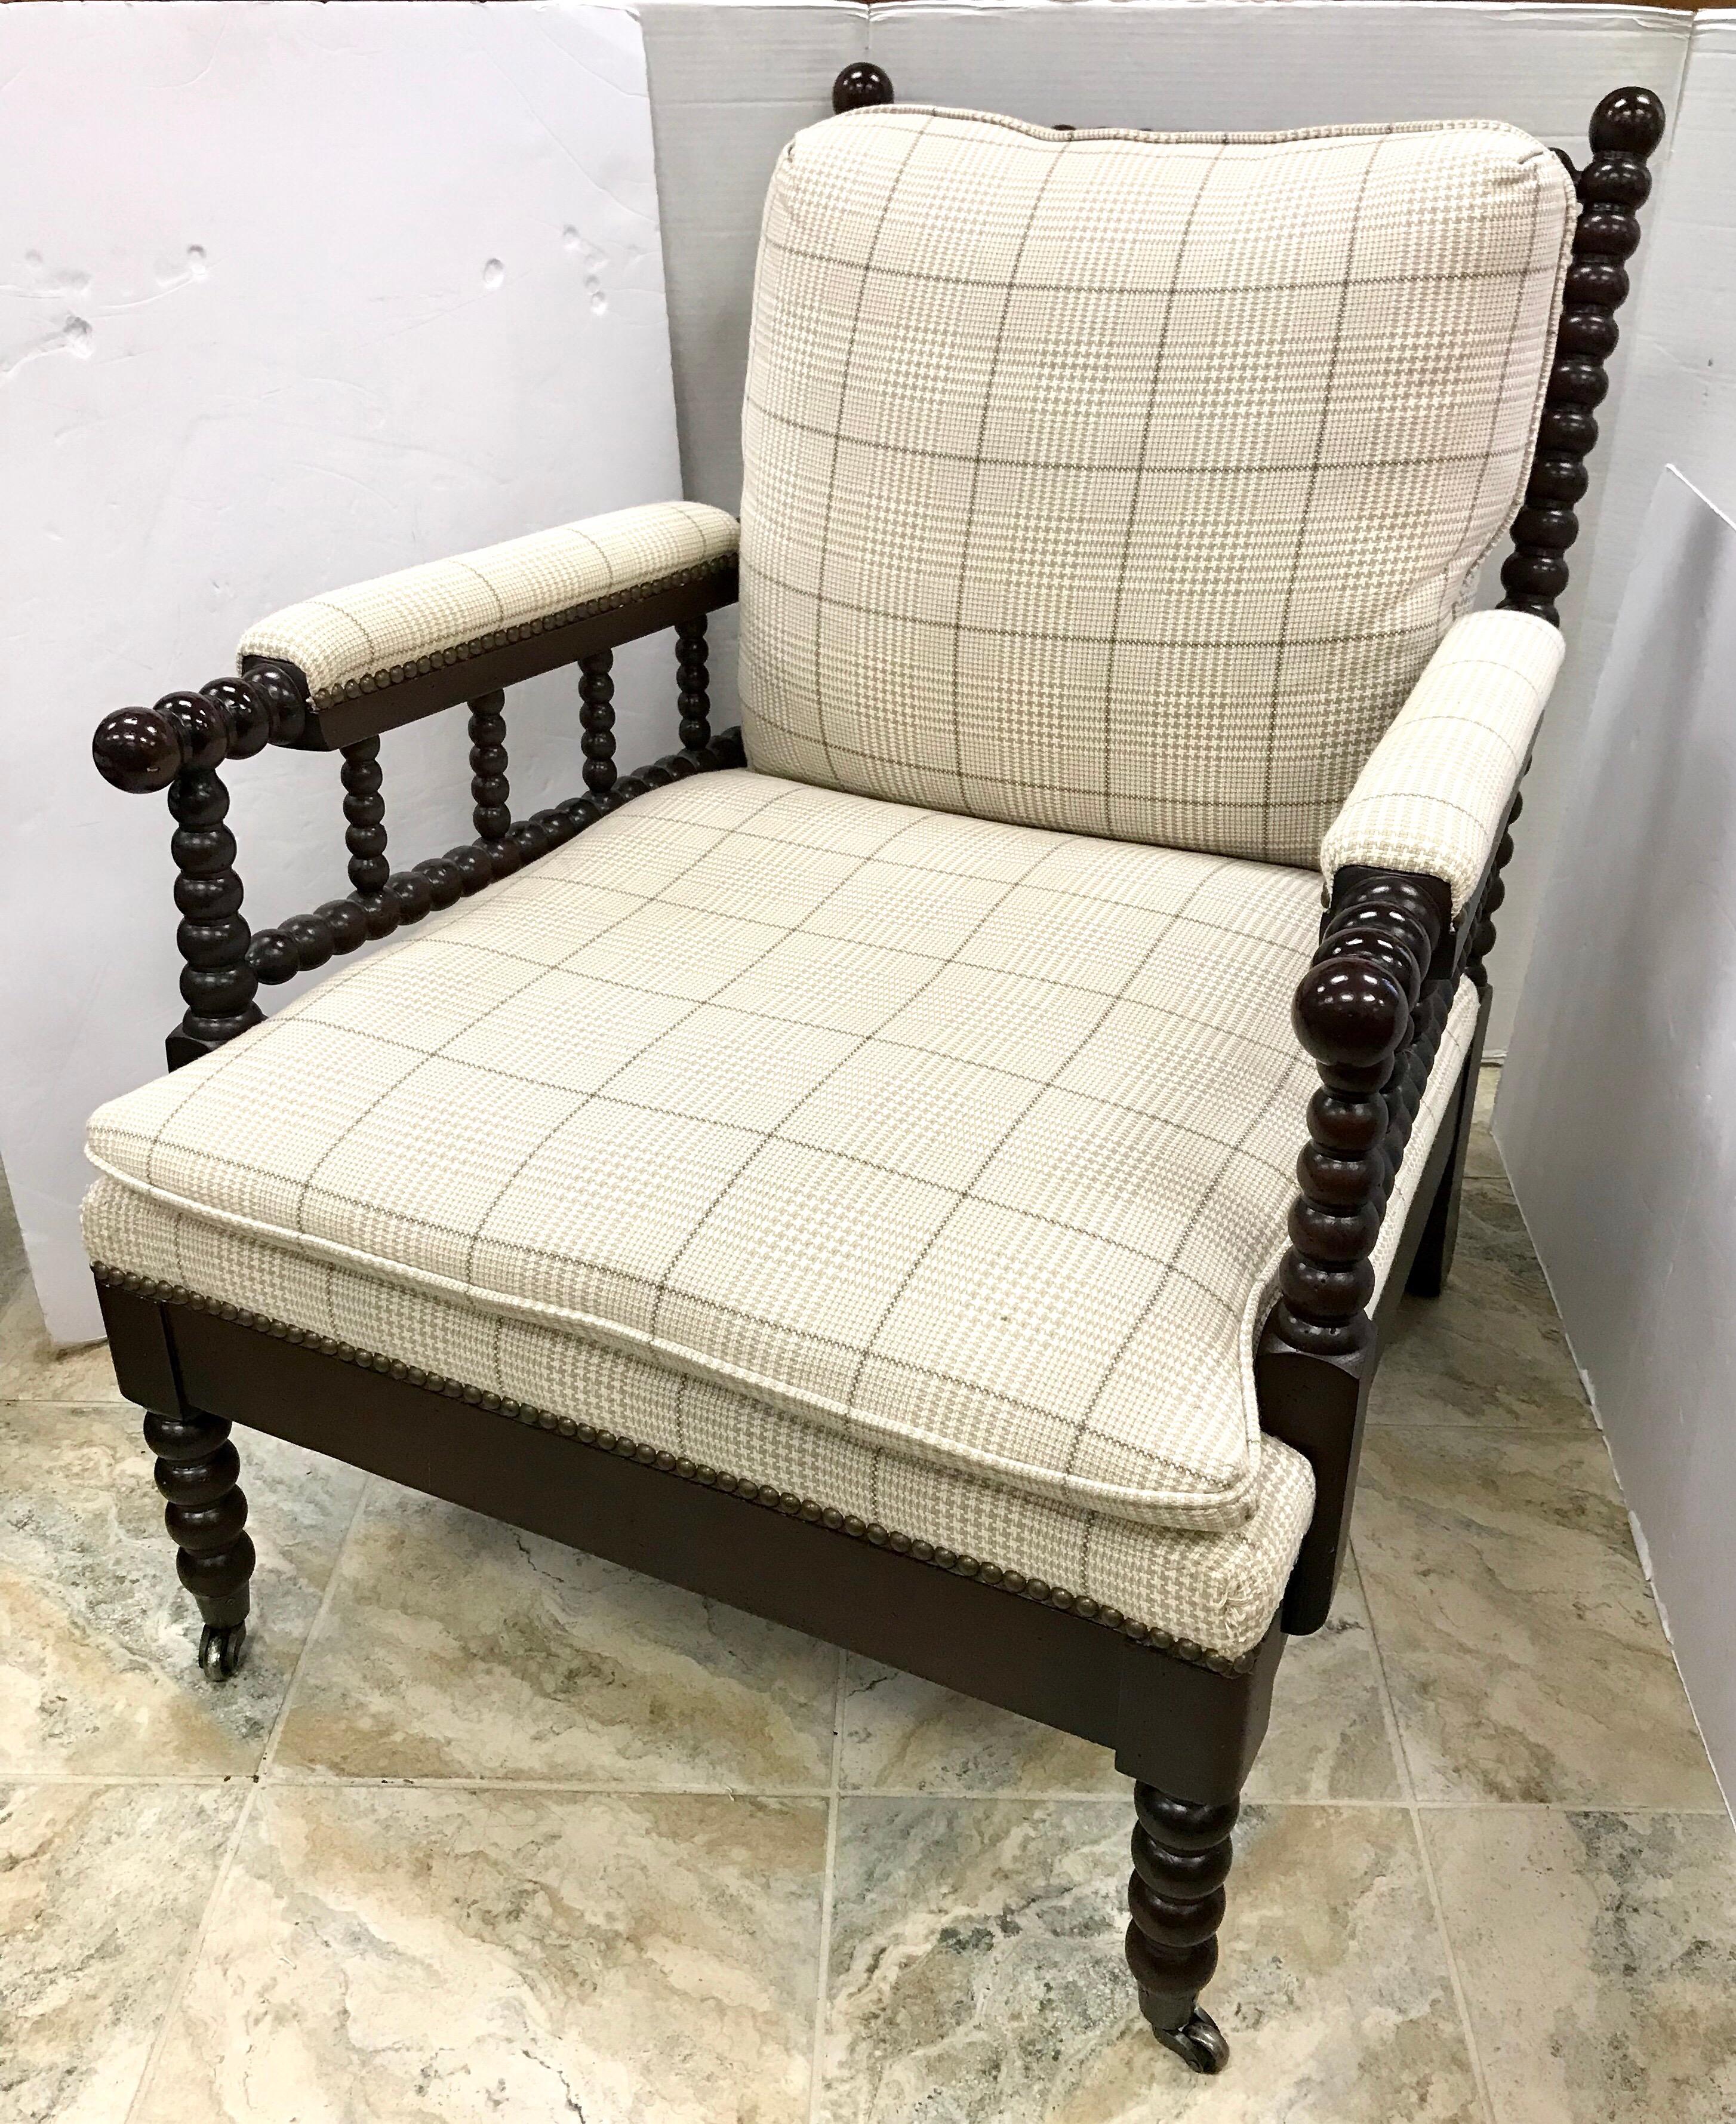 Mahogany spool arm chair by Vanguard, circa 1990s. Upholstered in a neutral plaid and features
casters on front legs and nailheads throughout.